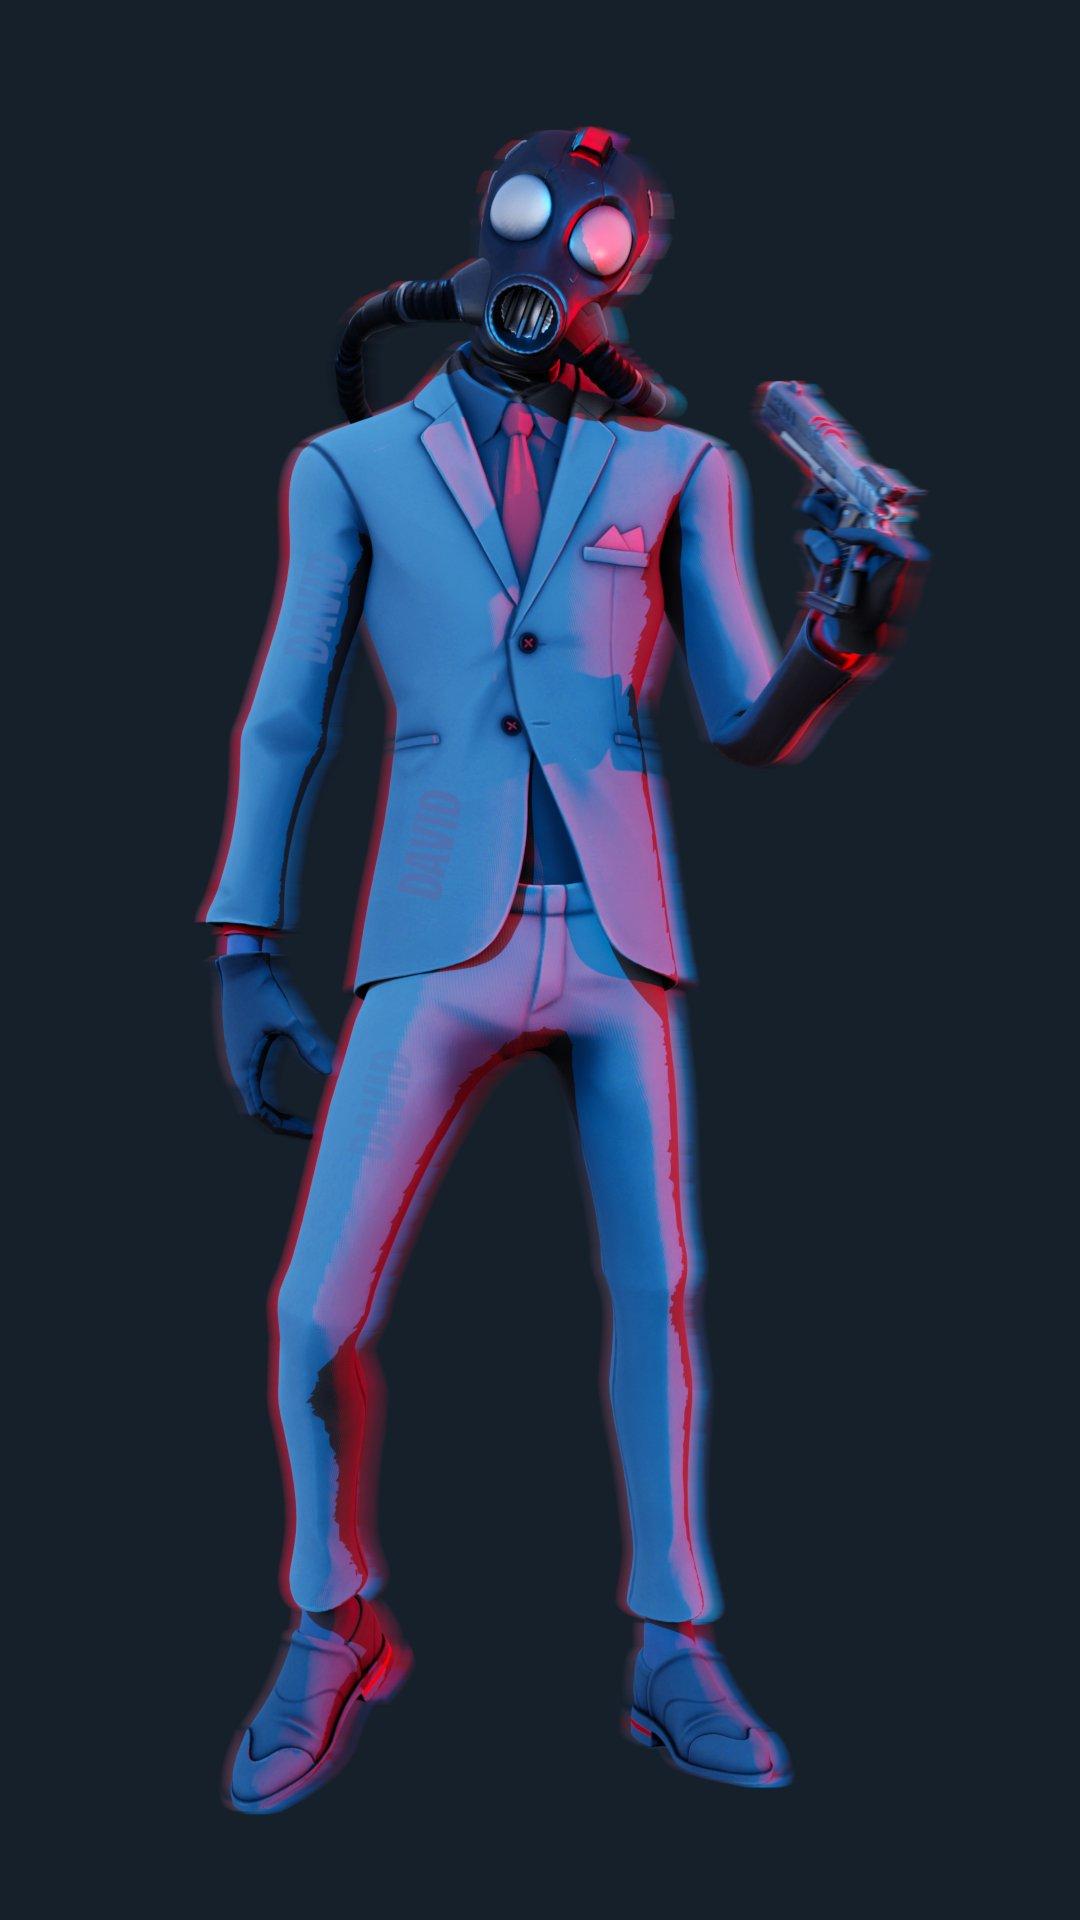  Chaos  Agent  Fortnite  Wallpapers Wallpaper Cave